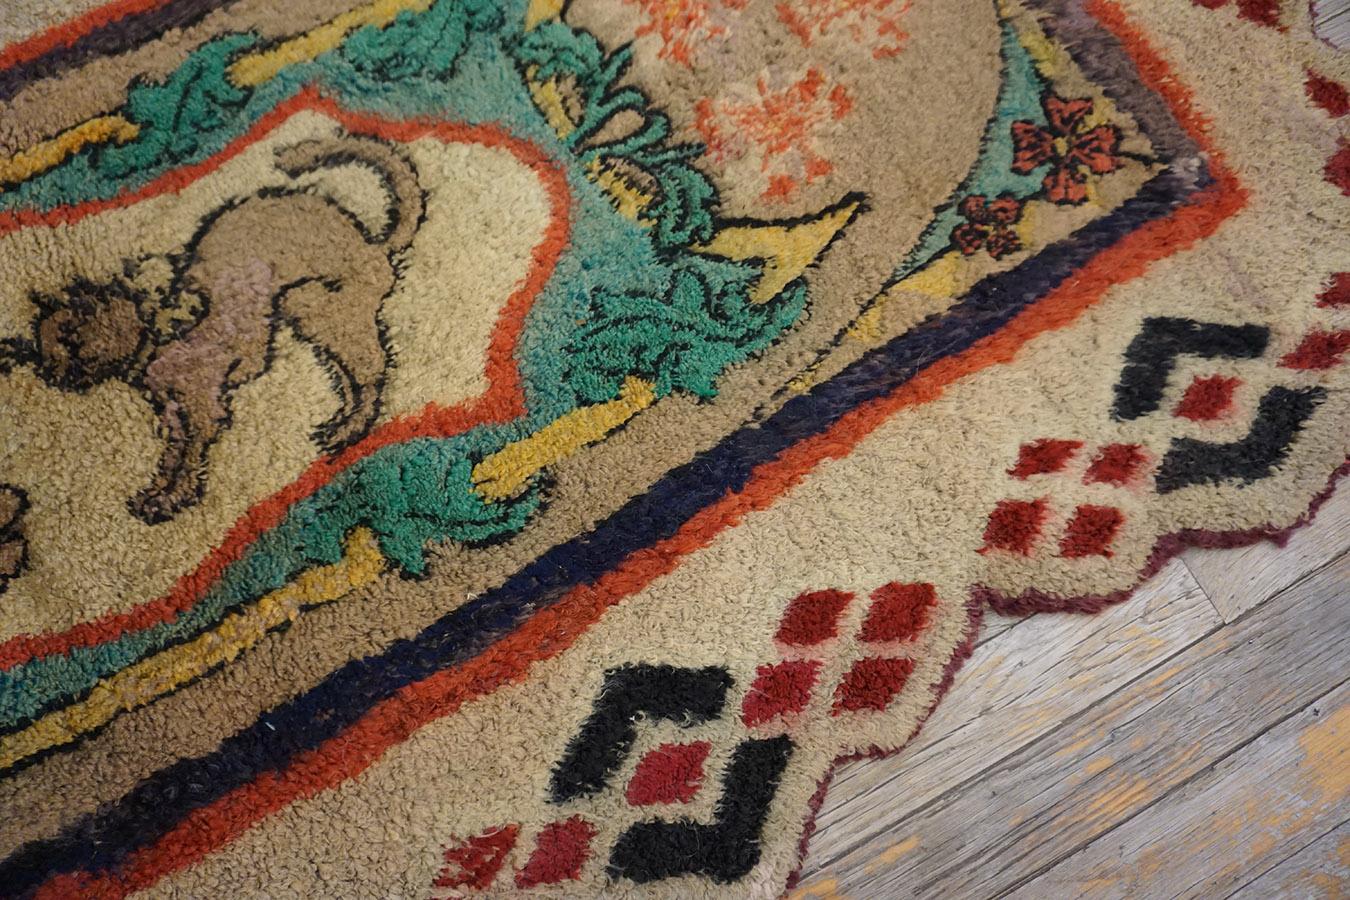 Early 20th Century Pictorial American Hooked Rug ( 2'8